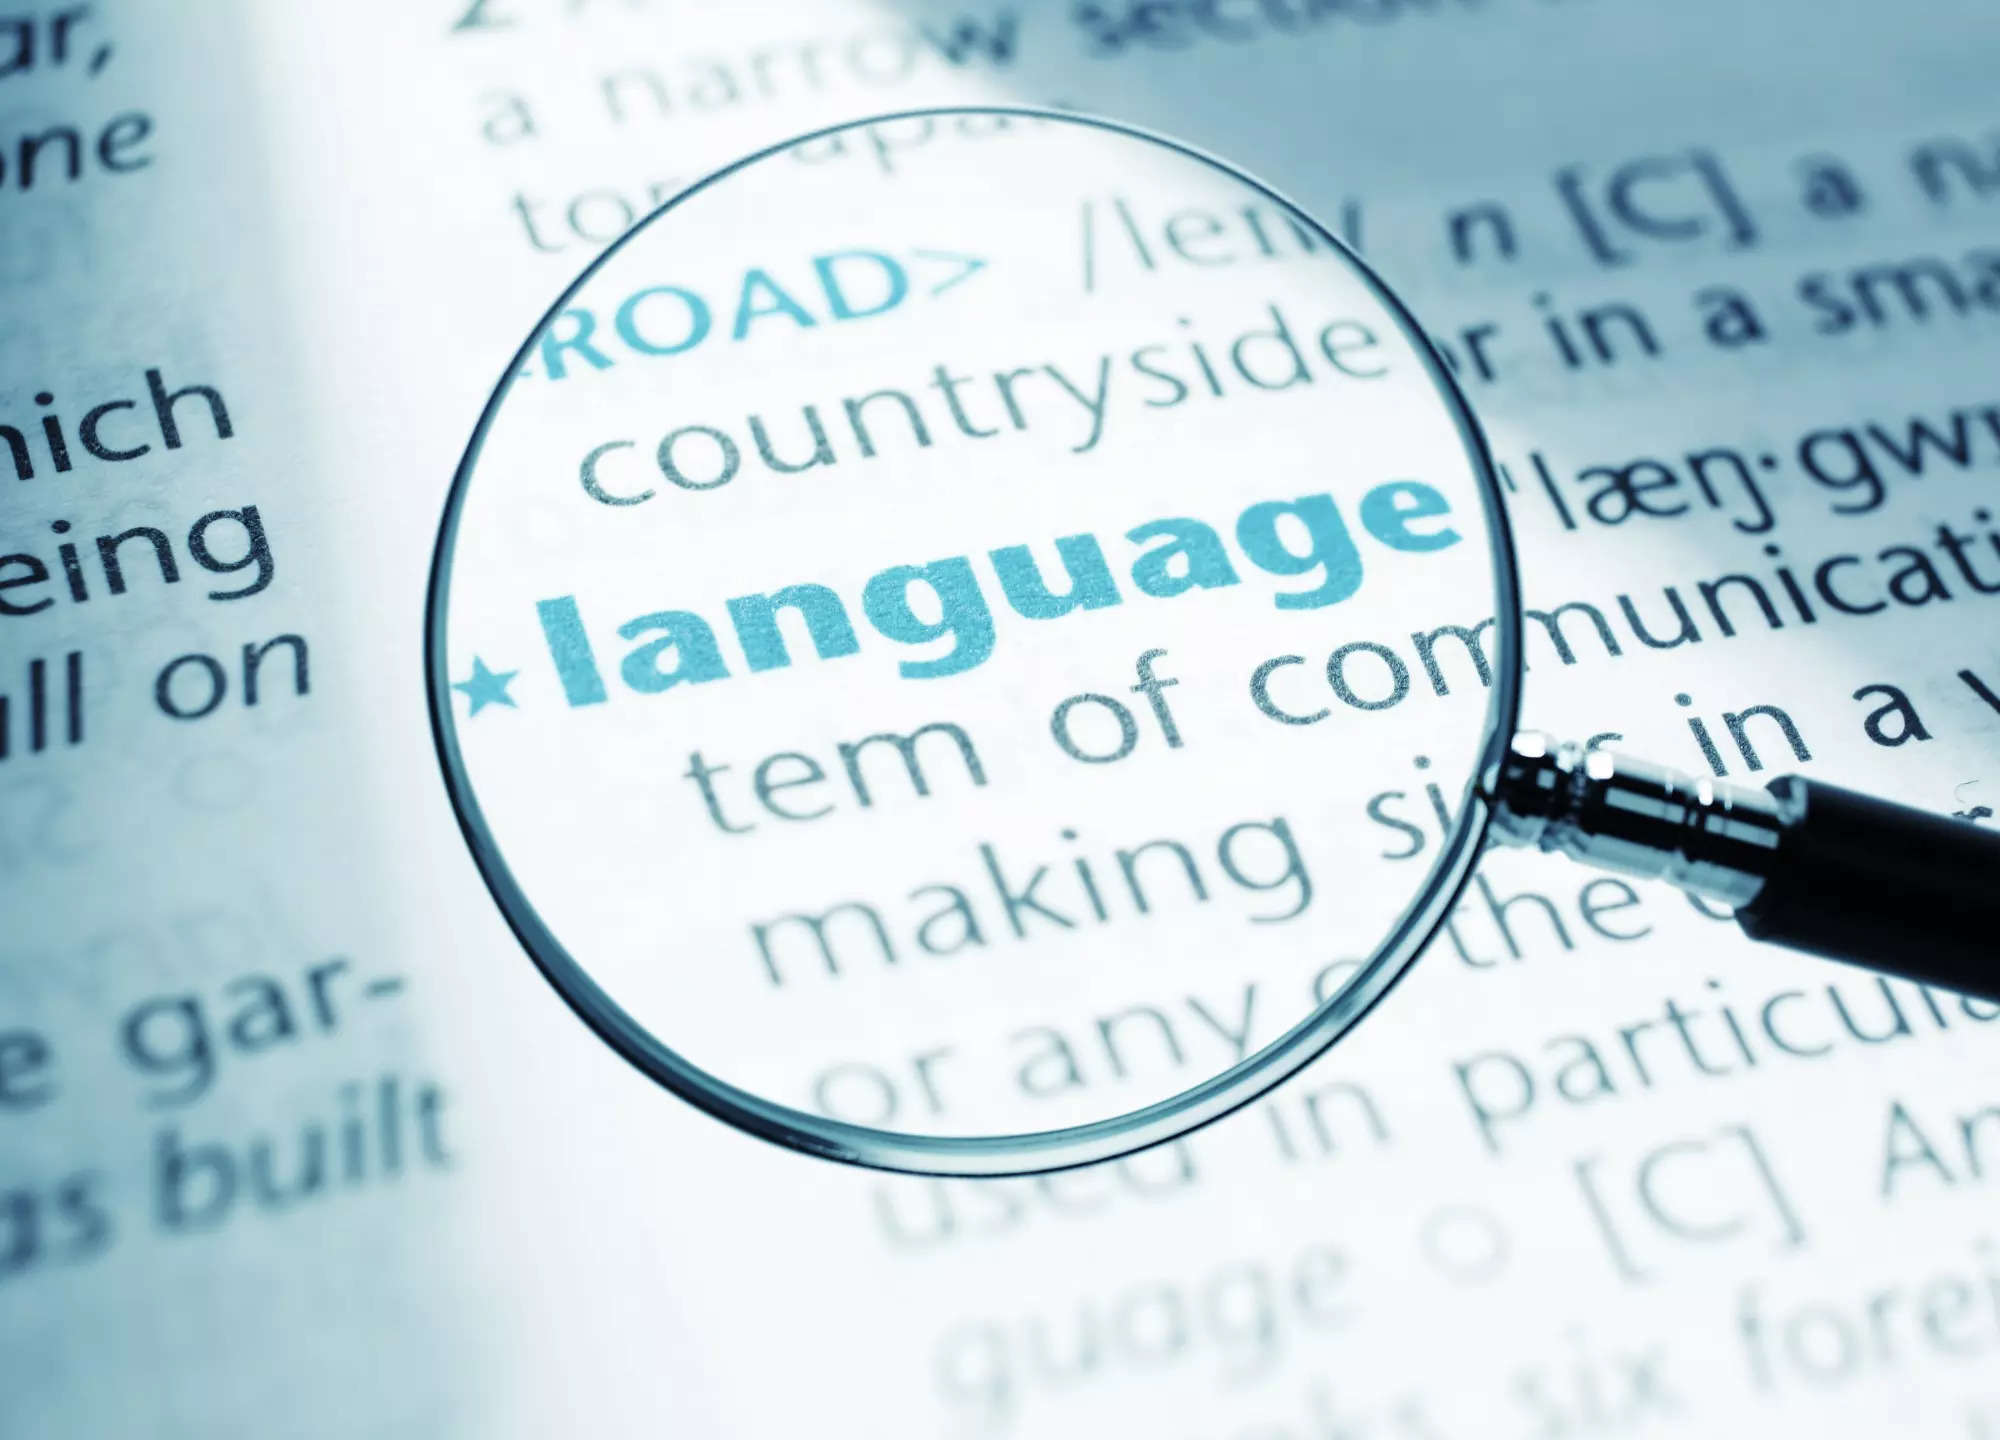 Translation of legal books in local languages is a time-consuming process